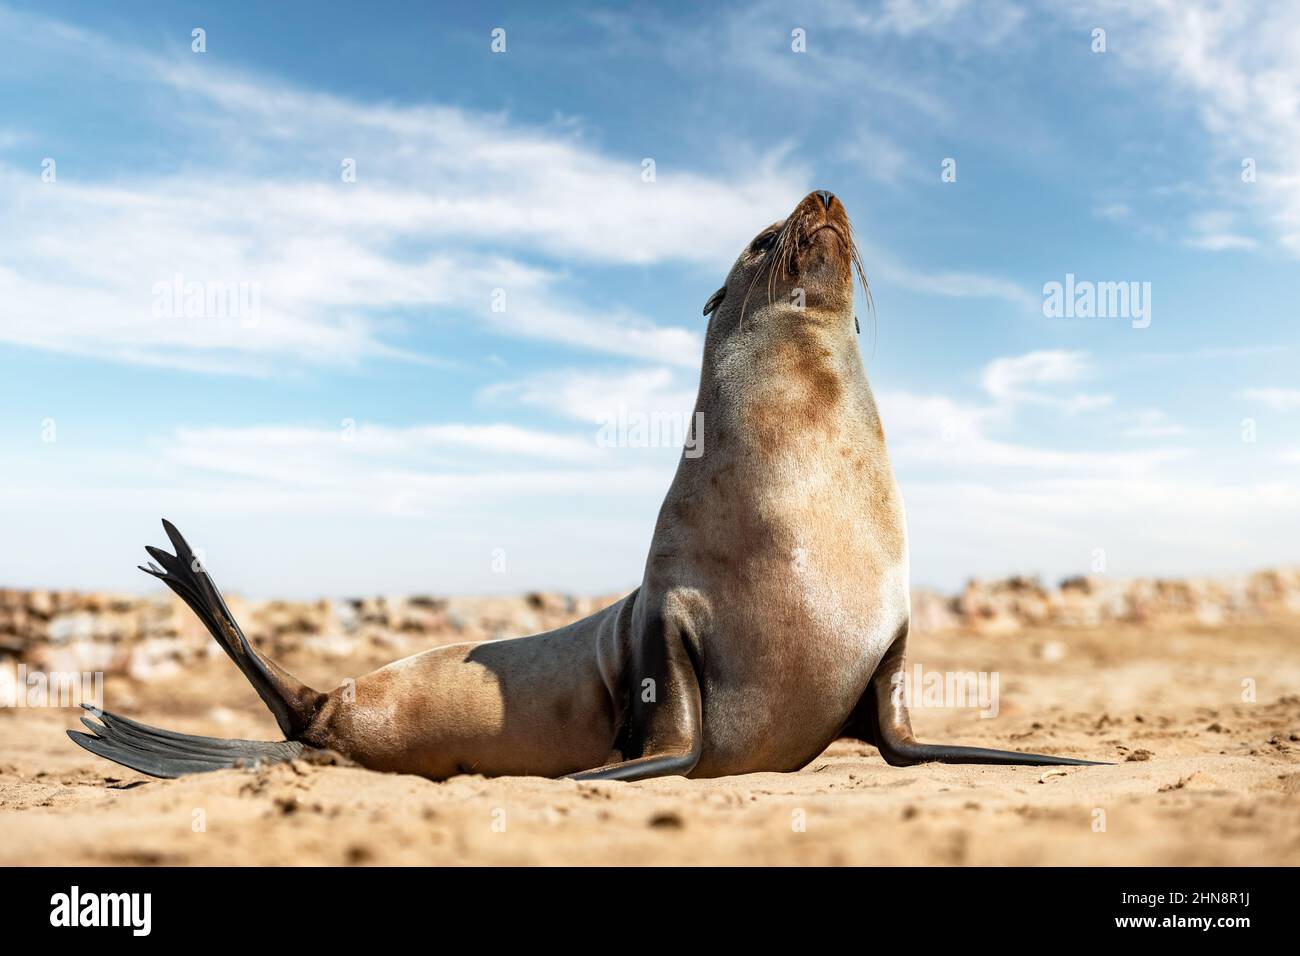 Fur seal enjoy the heat of the sun at the Cape Cross seal colony in Namibia, Africa. Wildlife photography Stock Photo